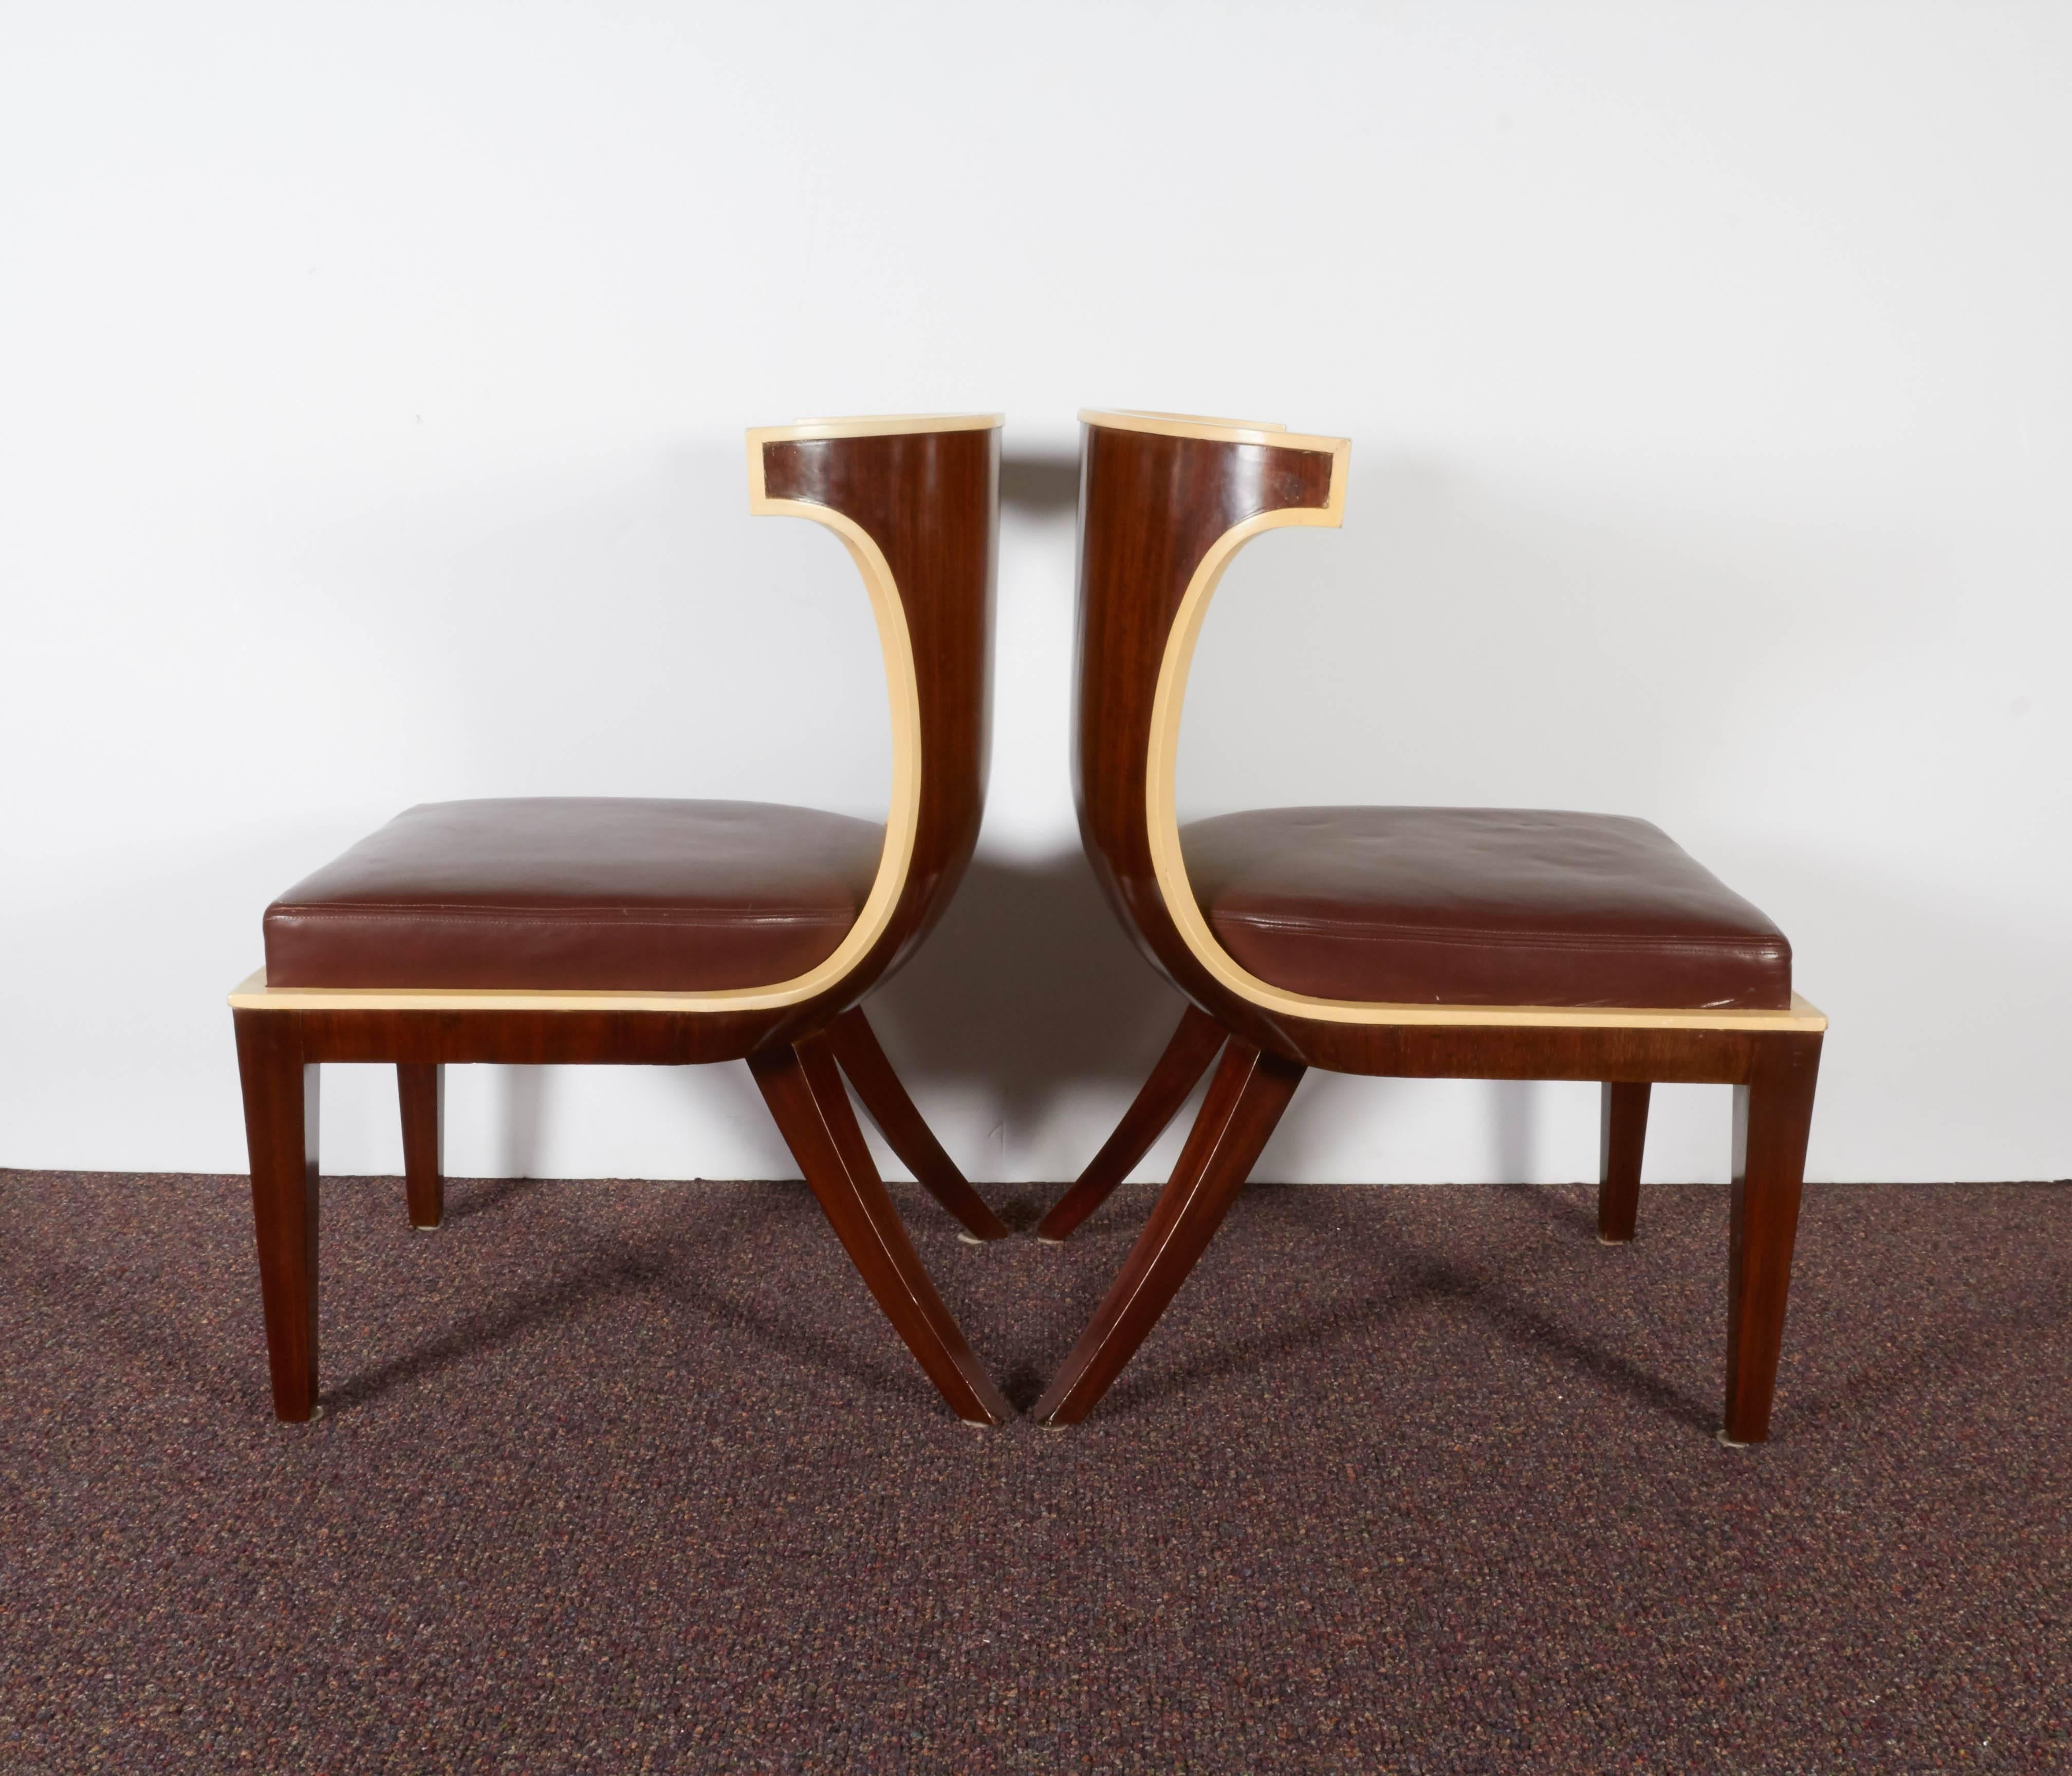 A pair of French Art Deco gondola side chairs by designer Ernest Boiceau (Swiss, 1881-1950), produced circa 1925, each with curved back in mahogany, painted ivory to the front and raised on saber legs, including leather seats. These chairs remain in